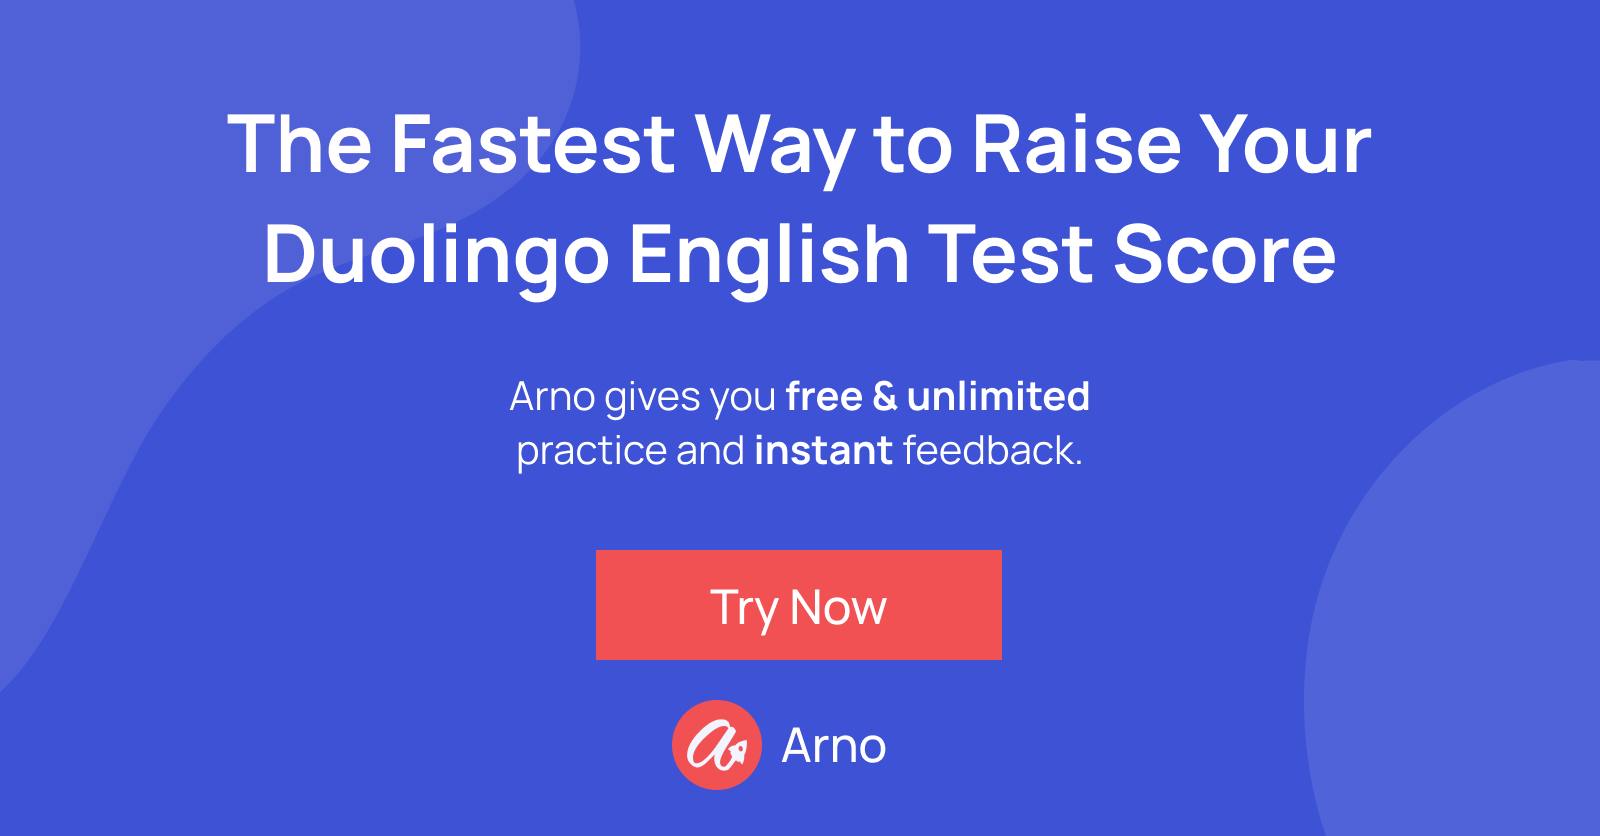 Arno gives is the fastest way to raise your score on the DET. Click here to try it.